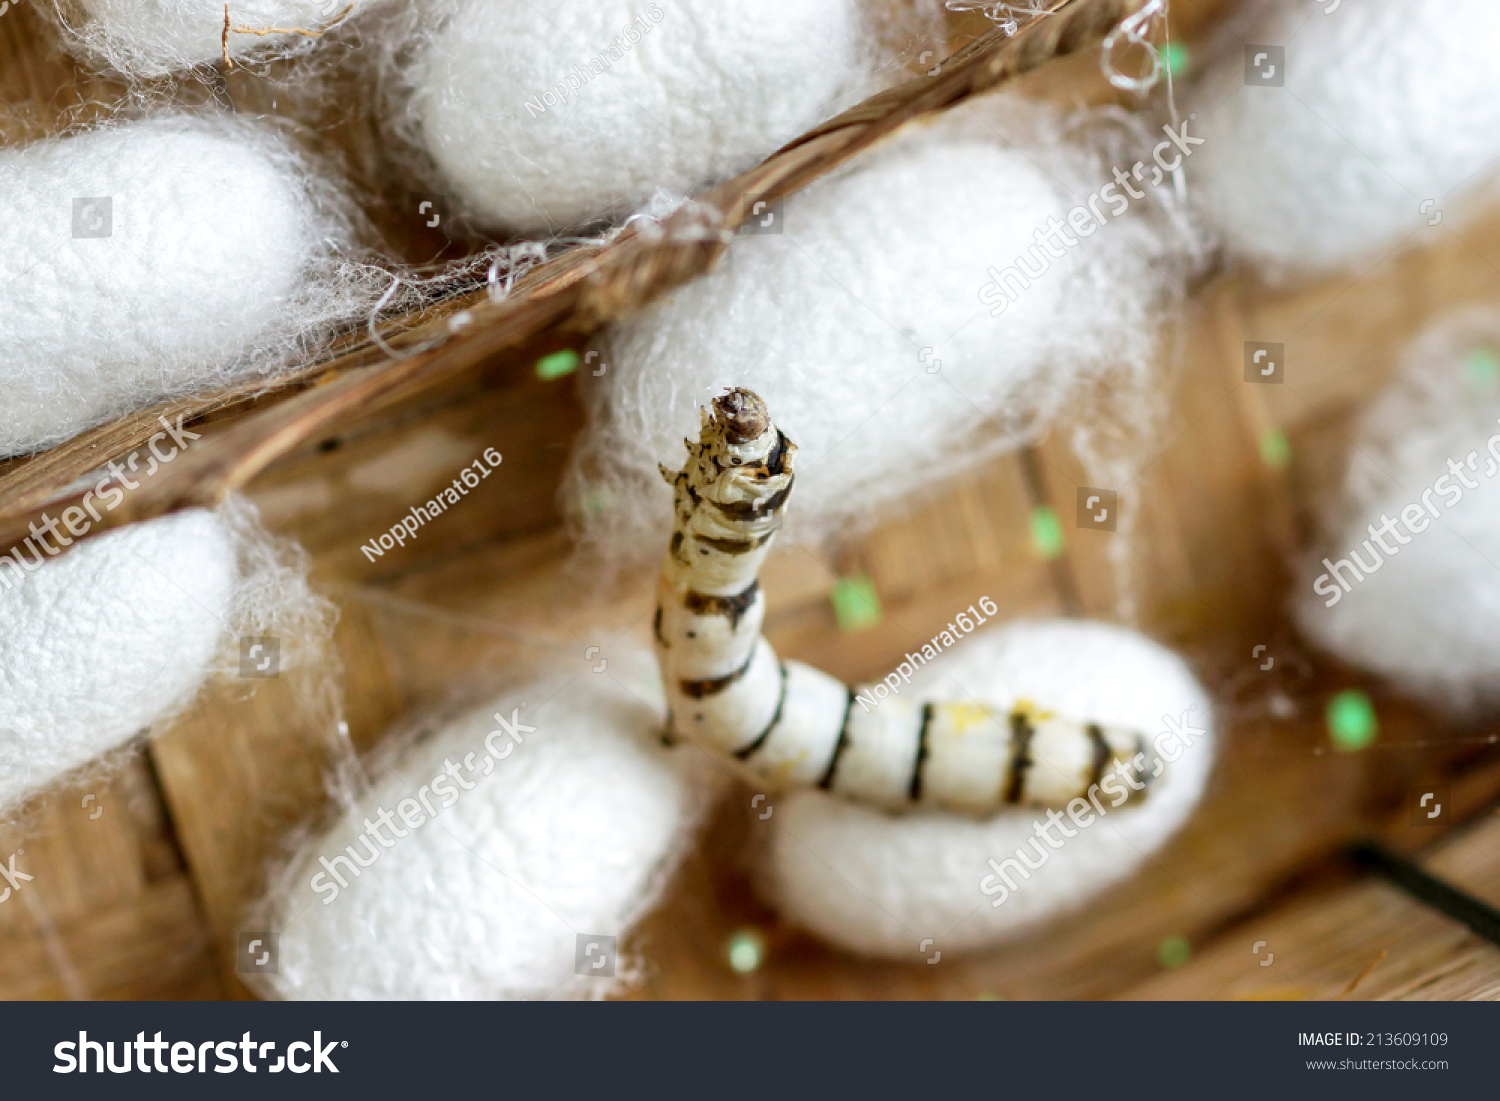 group of silk worm cocoons in nests #213609109